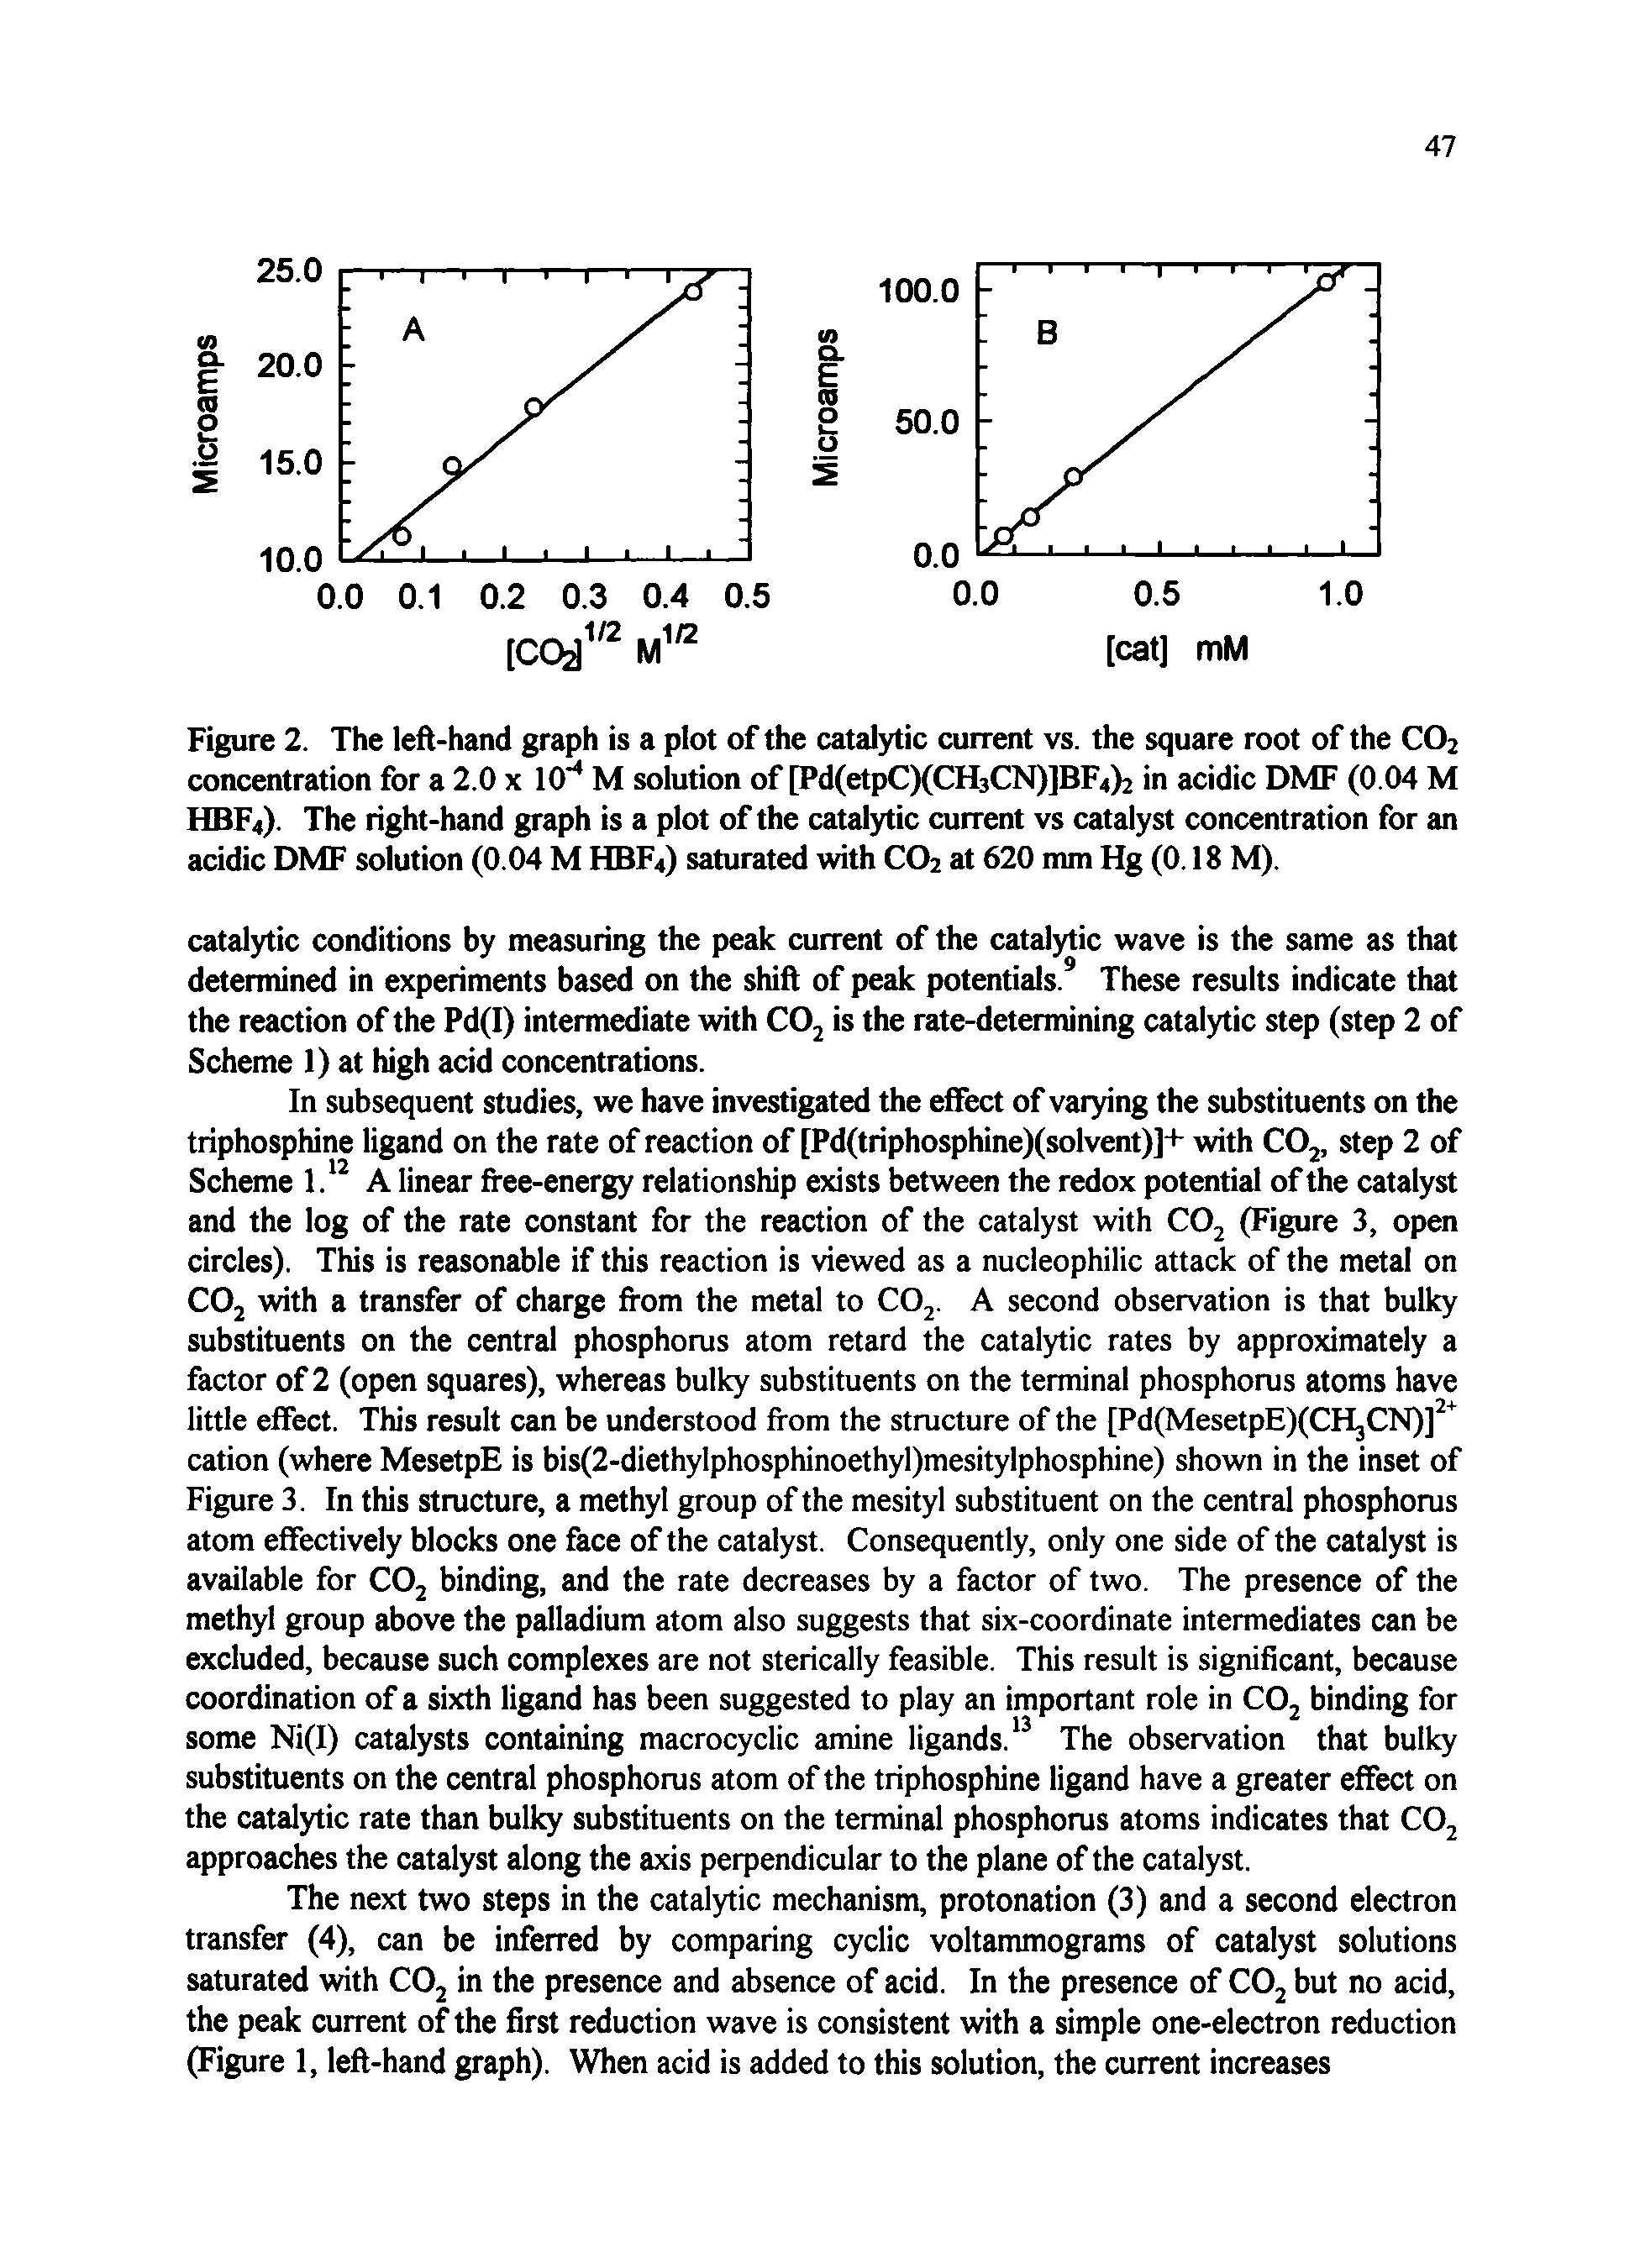 Figure 2. The left-hand graph is a plot of the catalytic current vs. the square root of the CO2 concentration for a 2.0 x 10 M solution of [Pd(etpC)(CH3CN)]BF4)2 in acidic DMF (0.04 M HBF4). The right-hand graph is a plot of the catalytic current vs catalyst concentration for an acidic DMF solution (0.04 M HBF4) saturated with CO2 at 620 mm Hg (0.18 M).